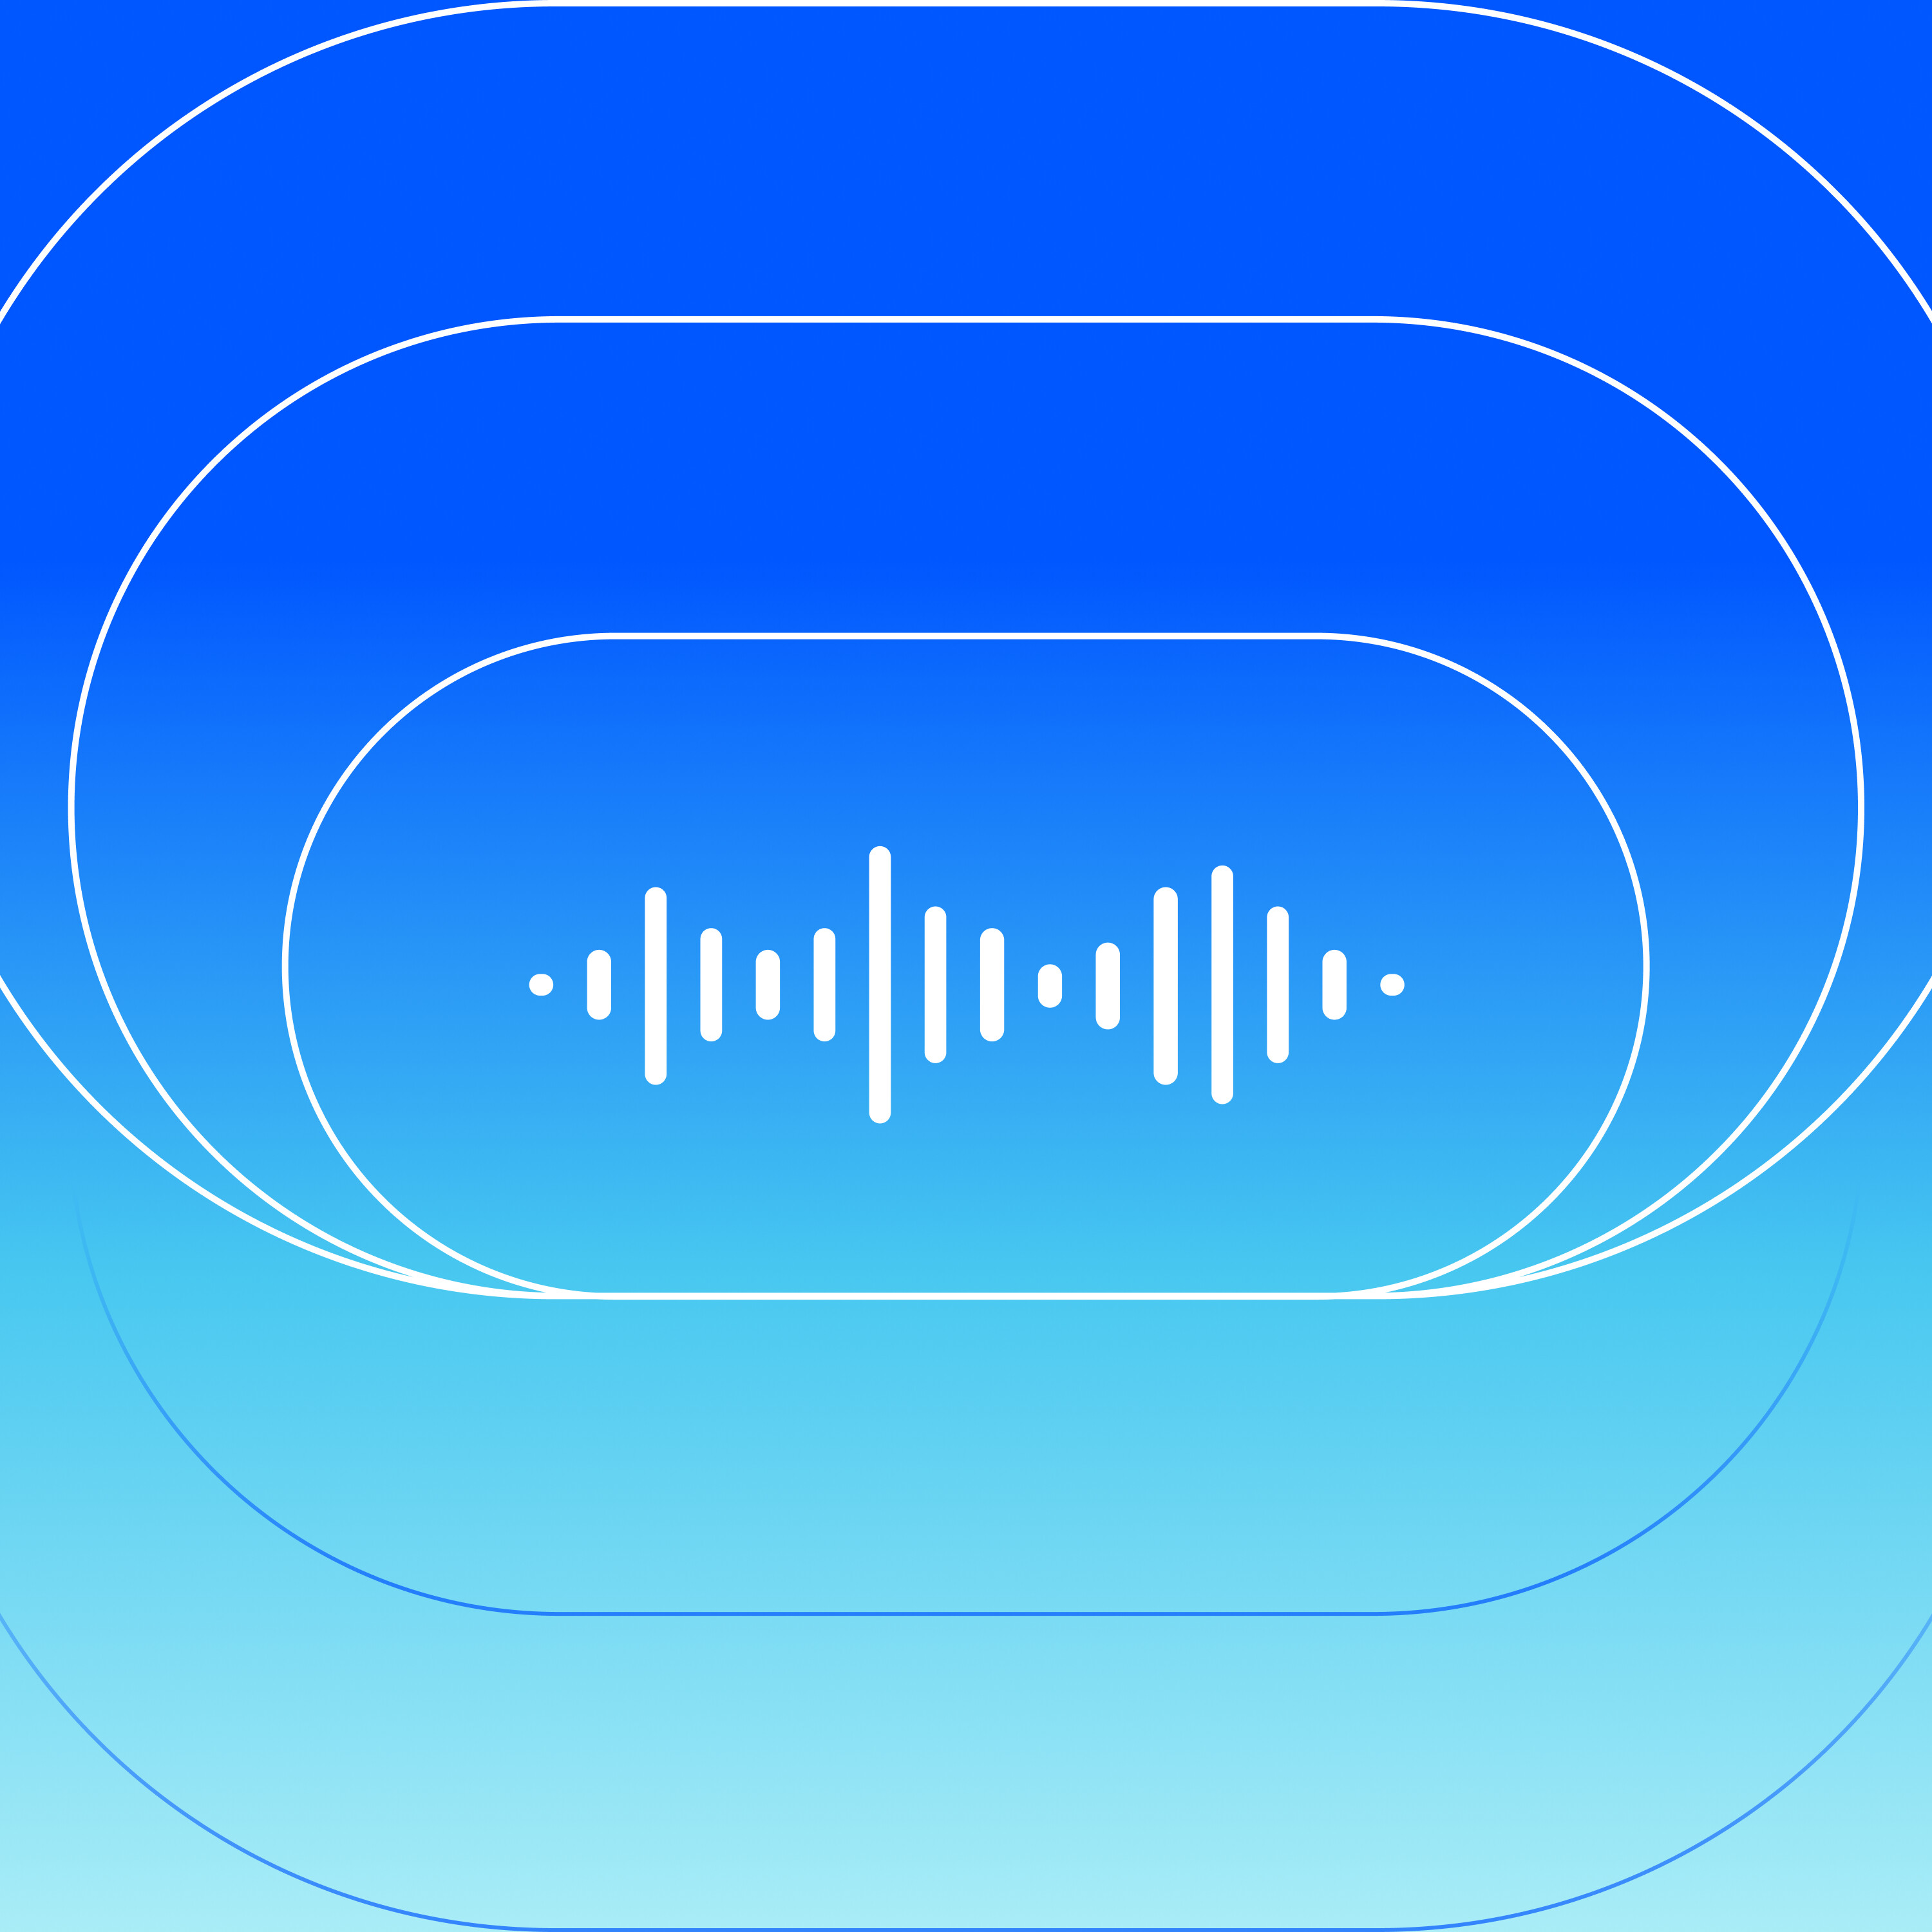 Three million downloads and counting: Inside Intercom reaches a podcasting milestone